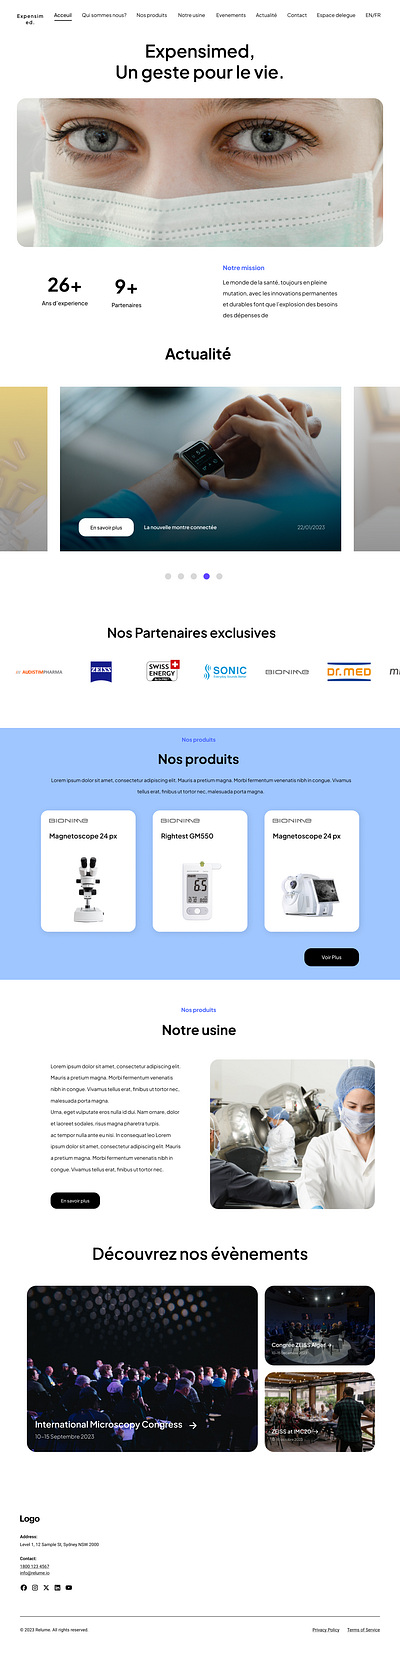 Landing page for Expensimed